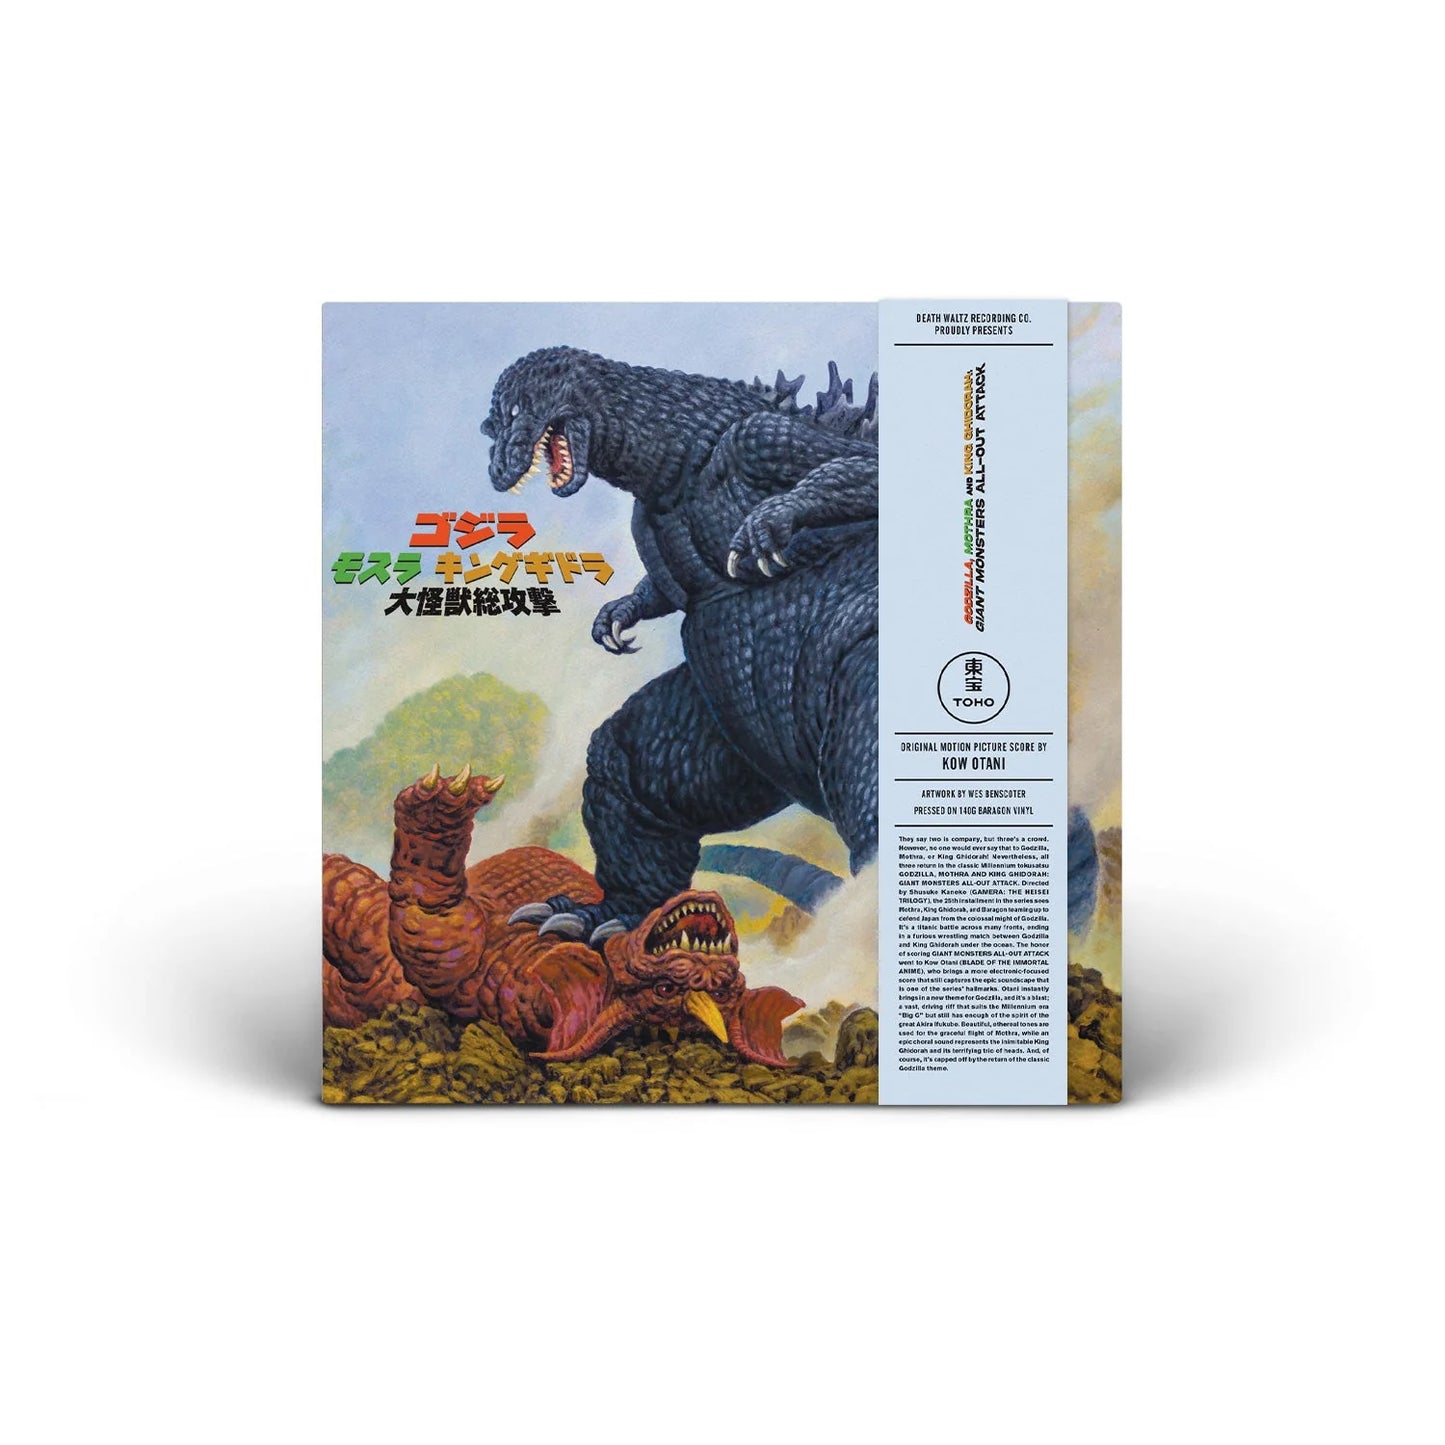 Godzilla, Mothra & King Ghidorah: Giant Monsters All-Out Attack Original Motion Picture Soundtrack Vinyl LP